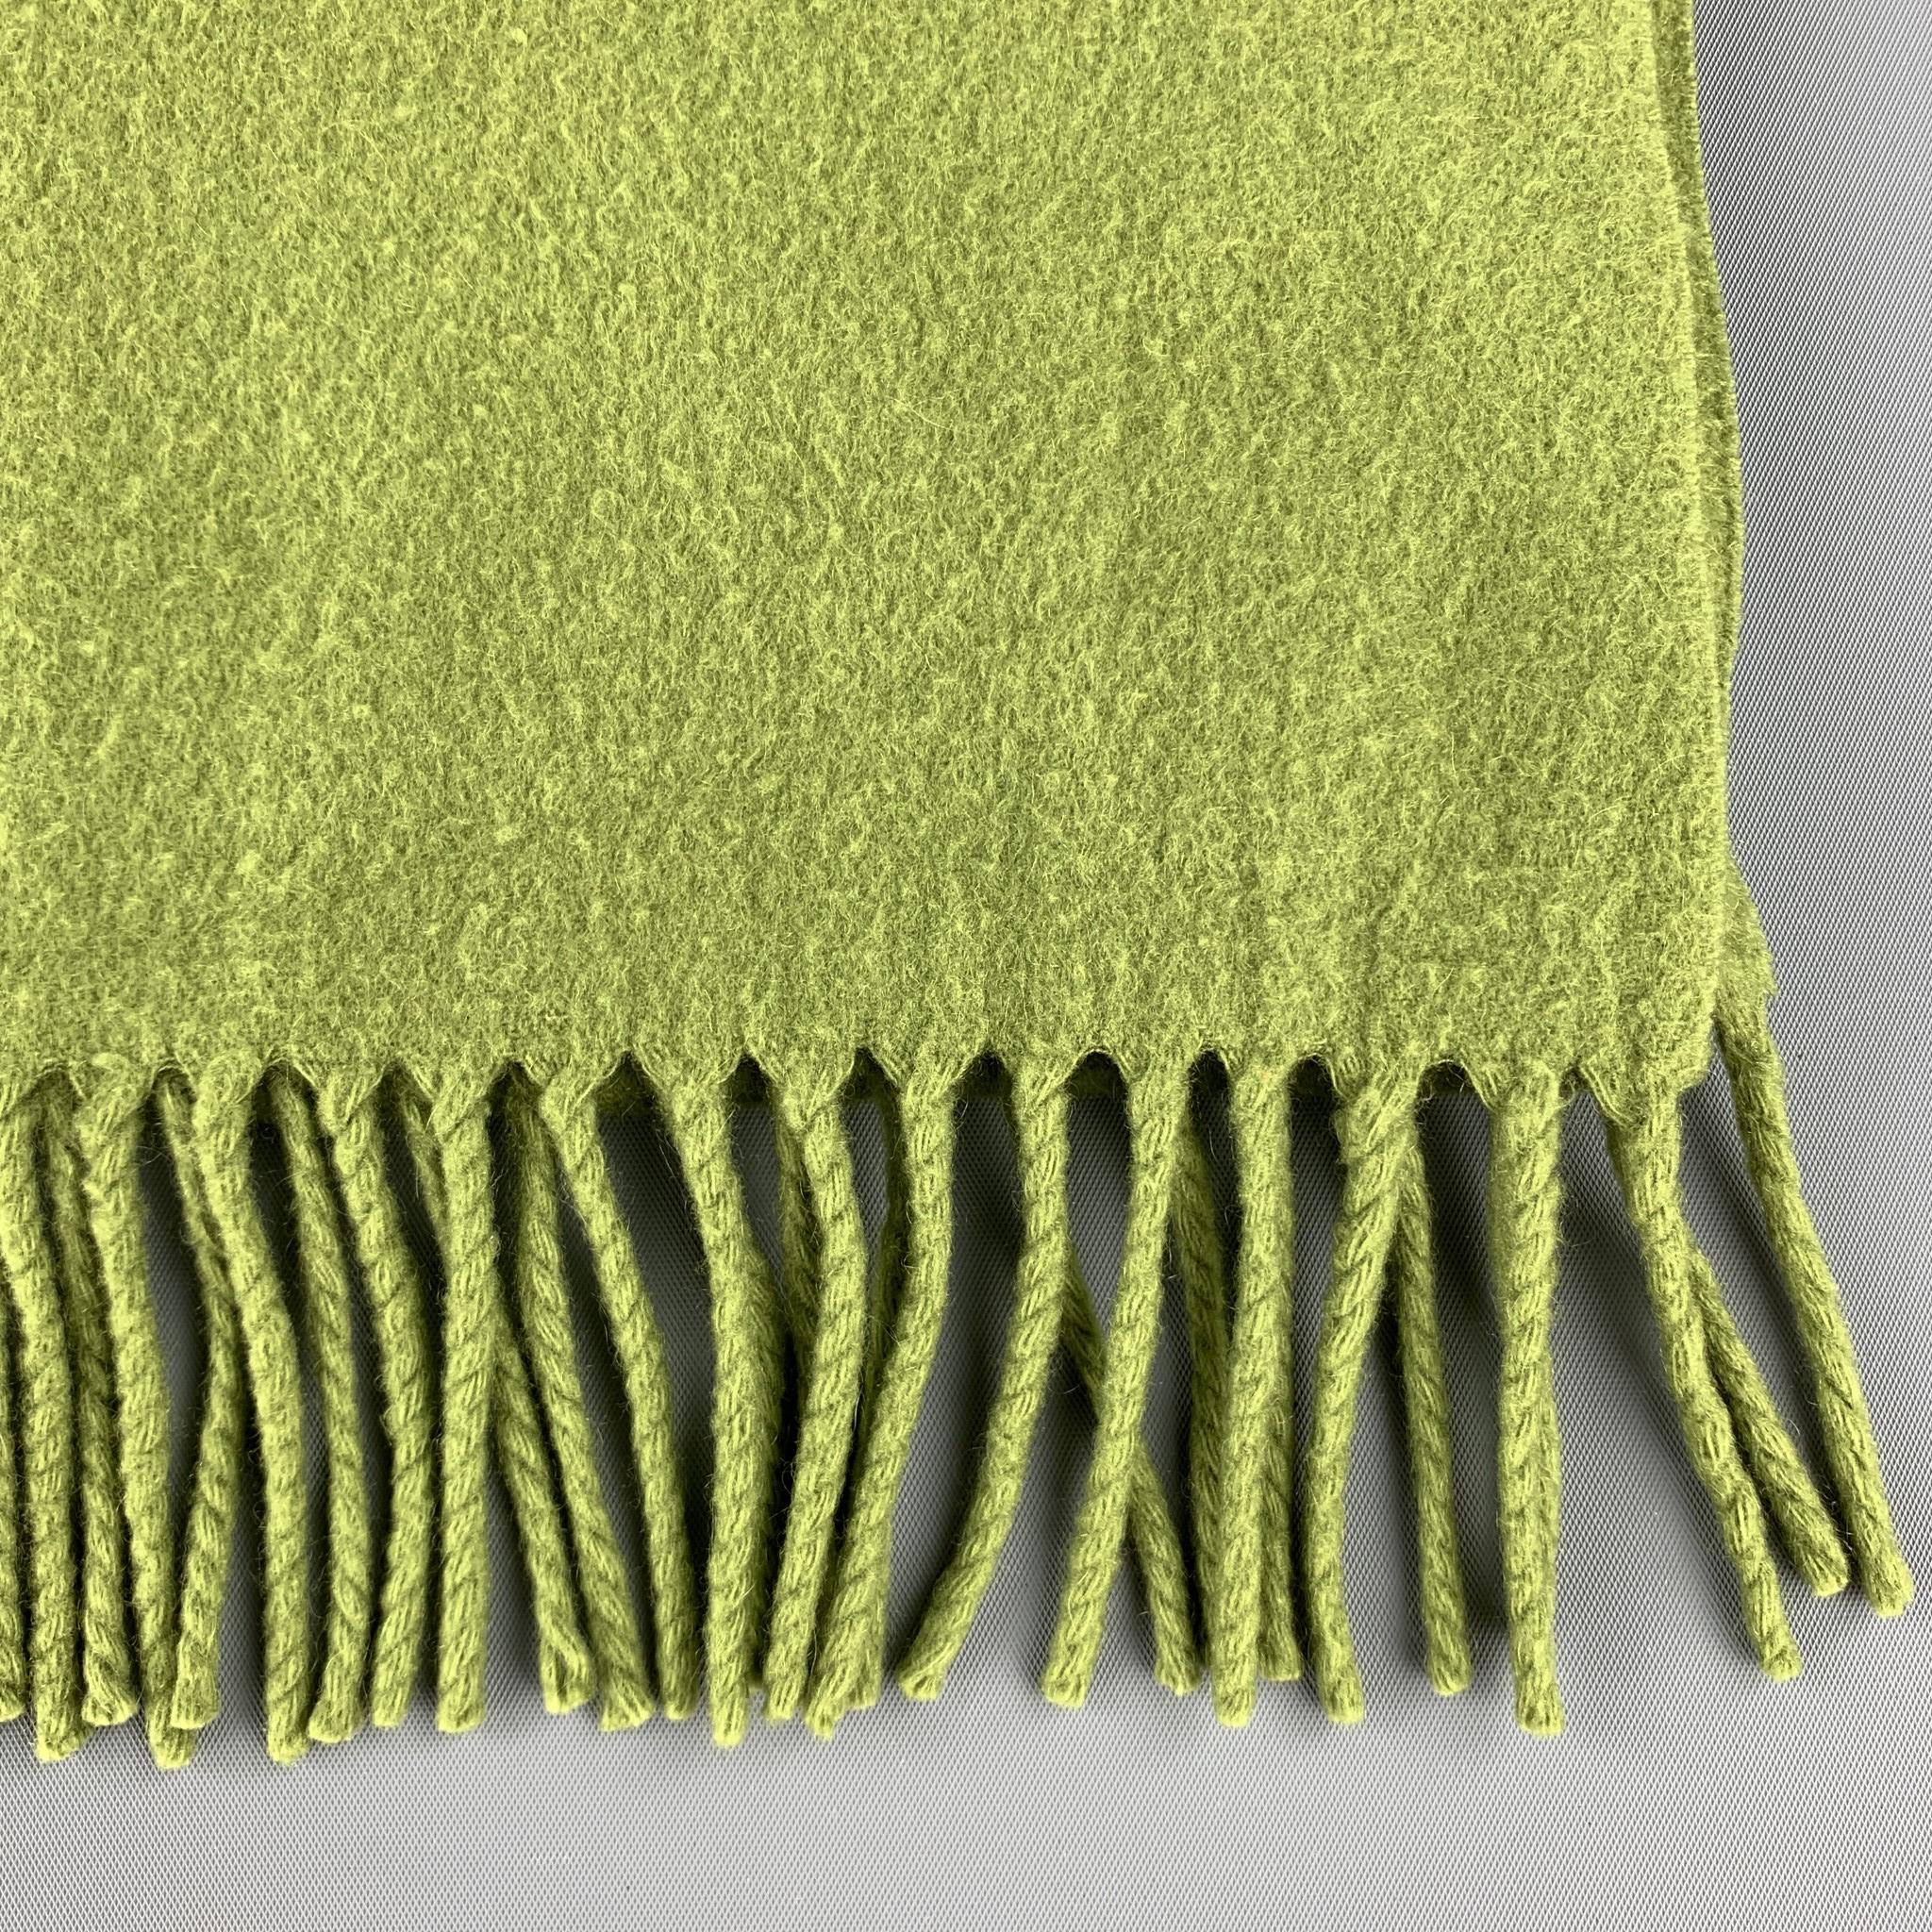 LORO PIANA scarf comes in a green cashmere with two and a half fringe trim. Made in Italy.

Good Pre-Owned Condition.

Measurements:

54 in. x 13 in. 